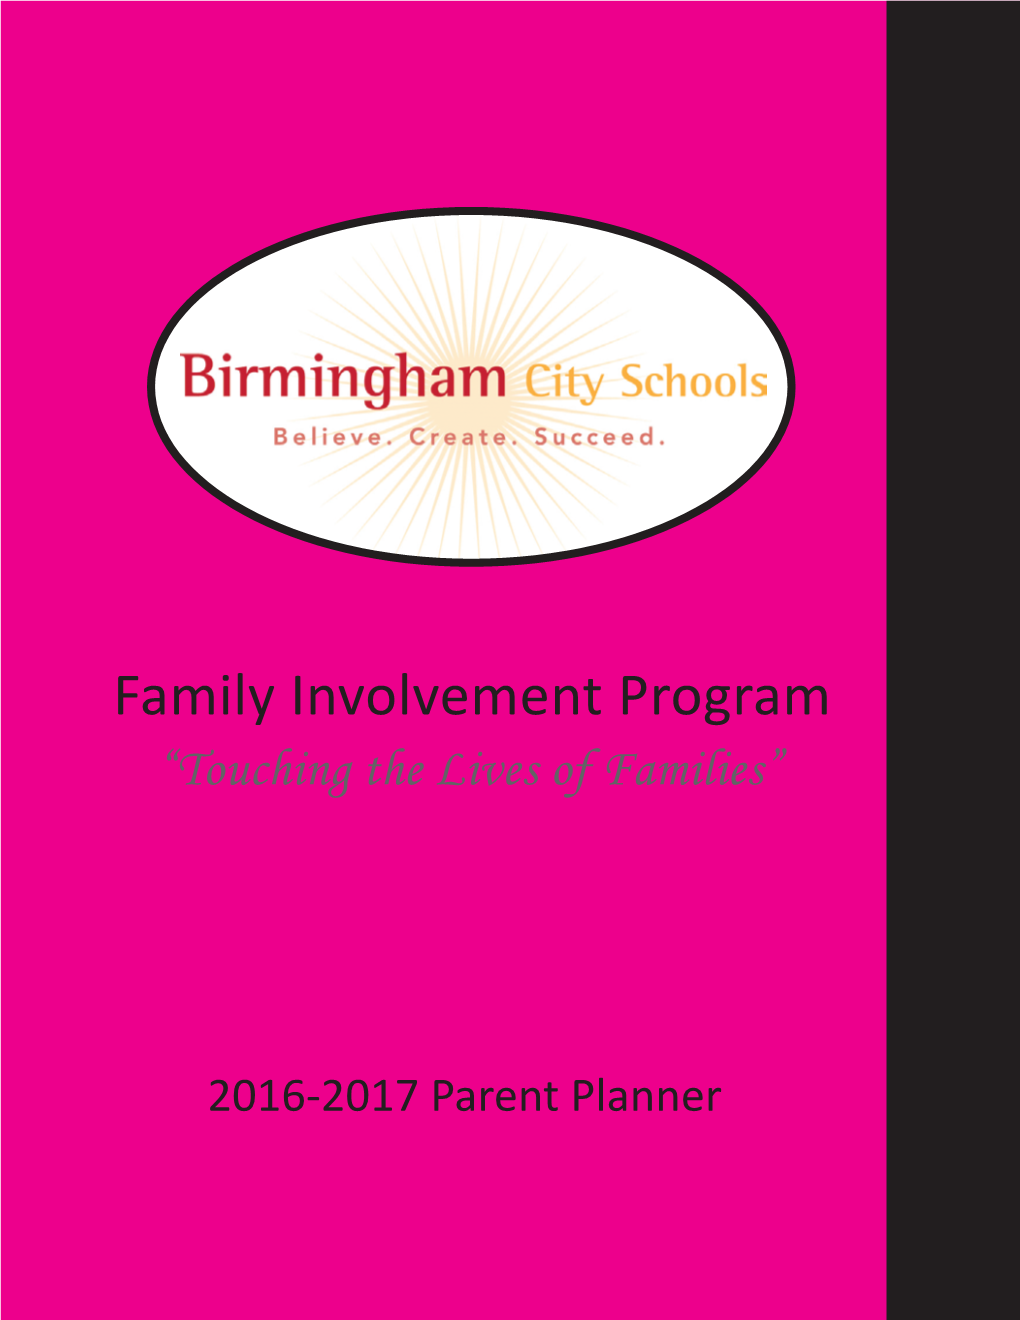 Family Involvement Program “Touching the Lives of Families” 406036C